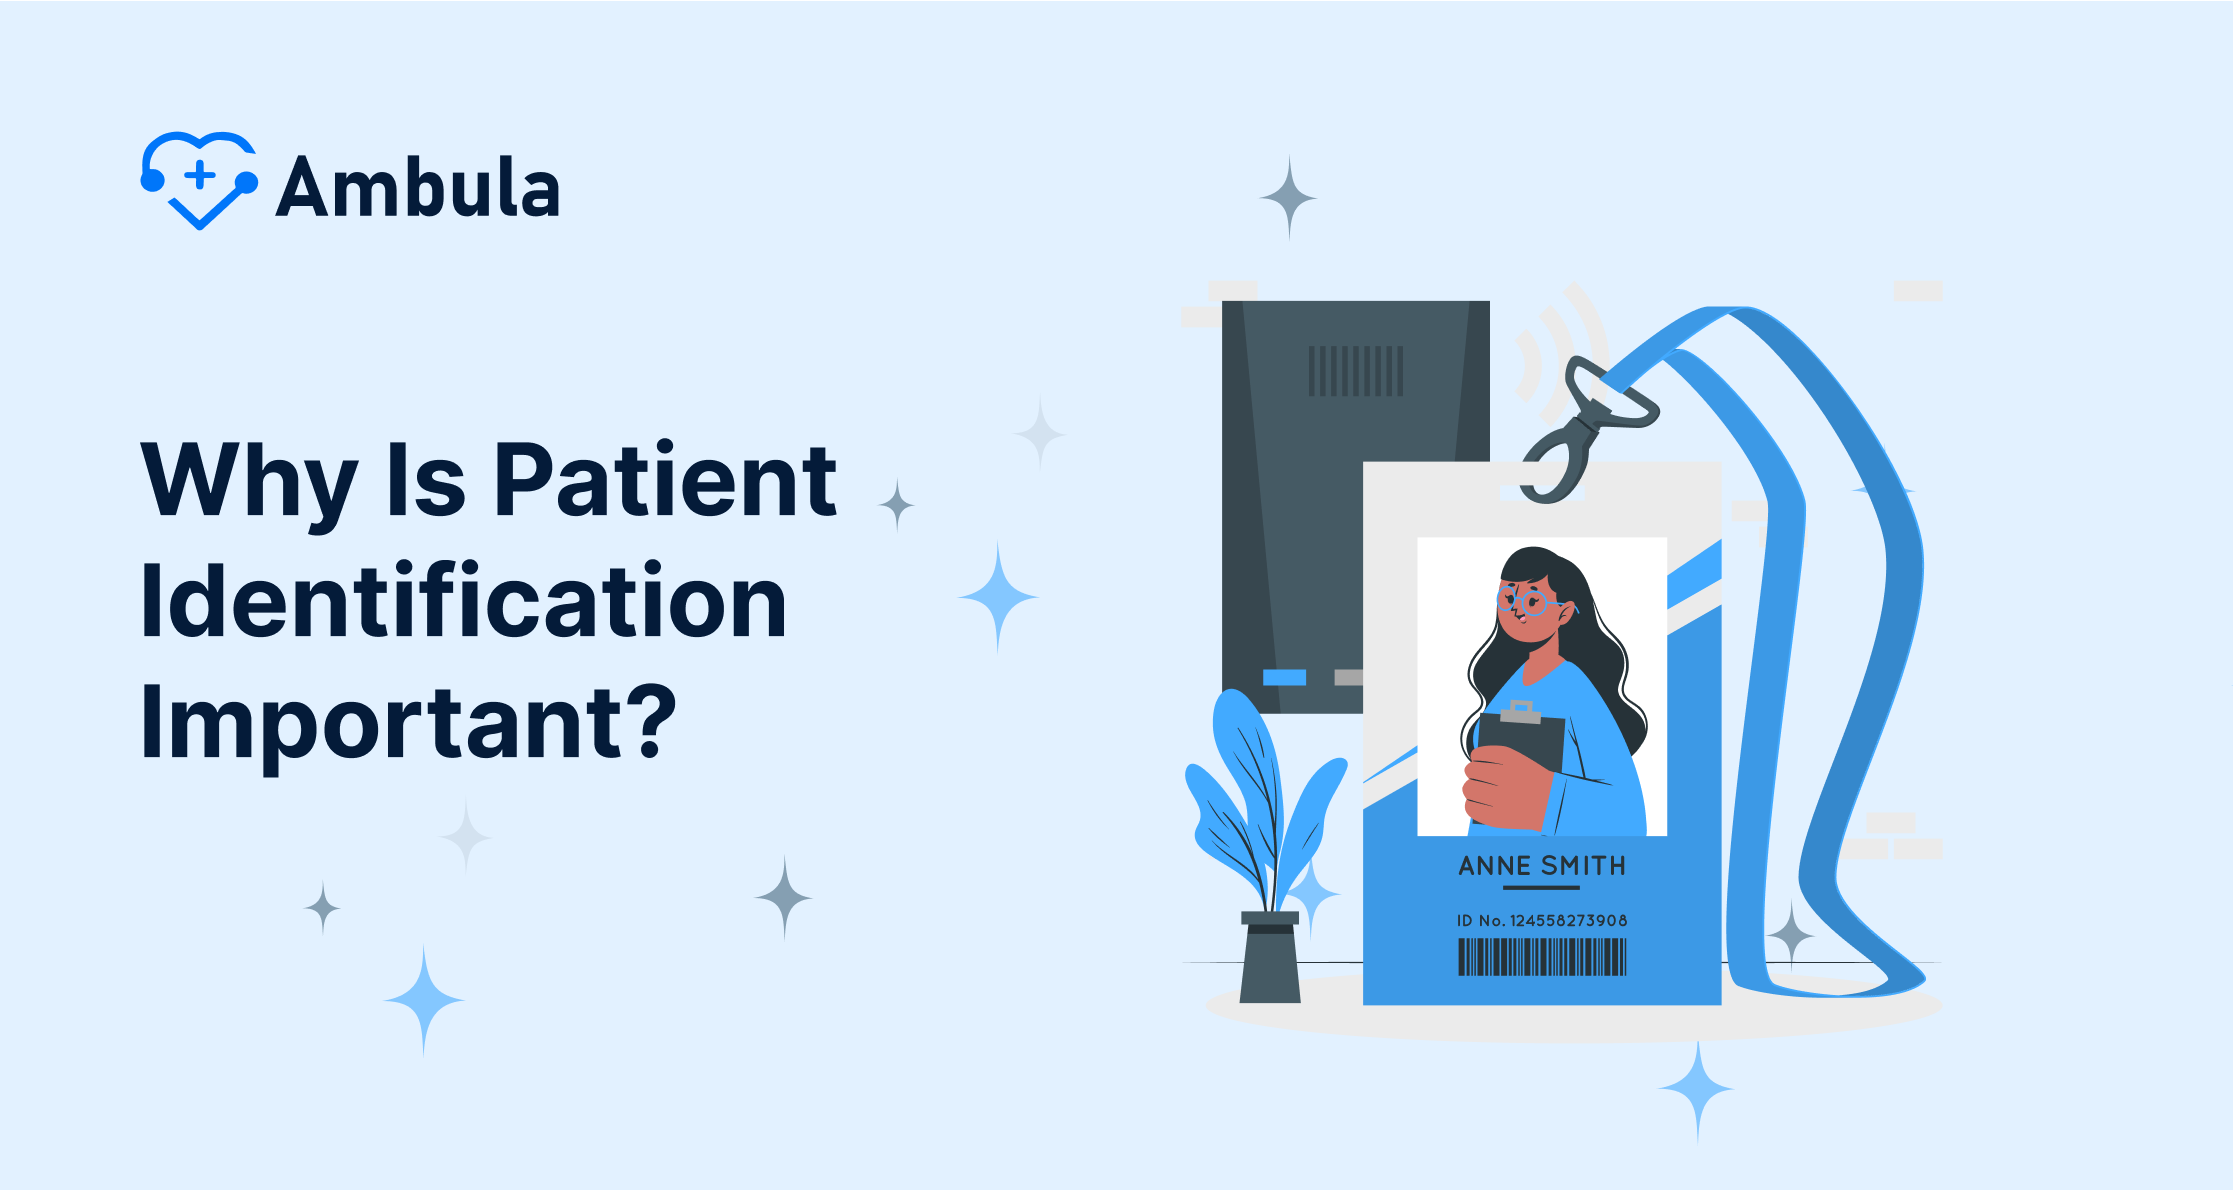 Why Is Patient Identification Important?